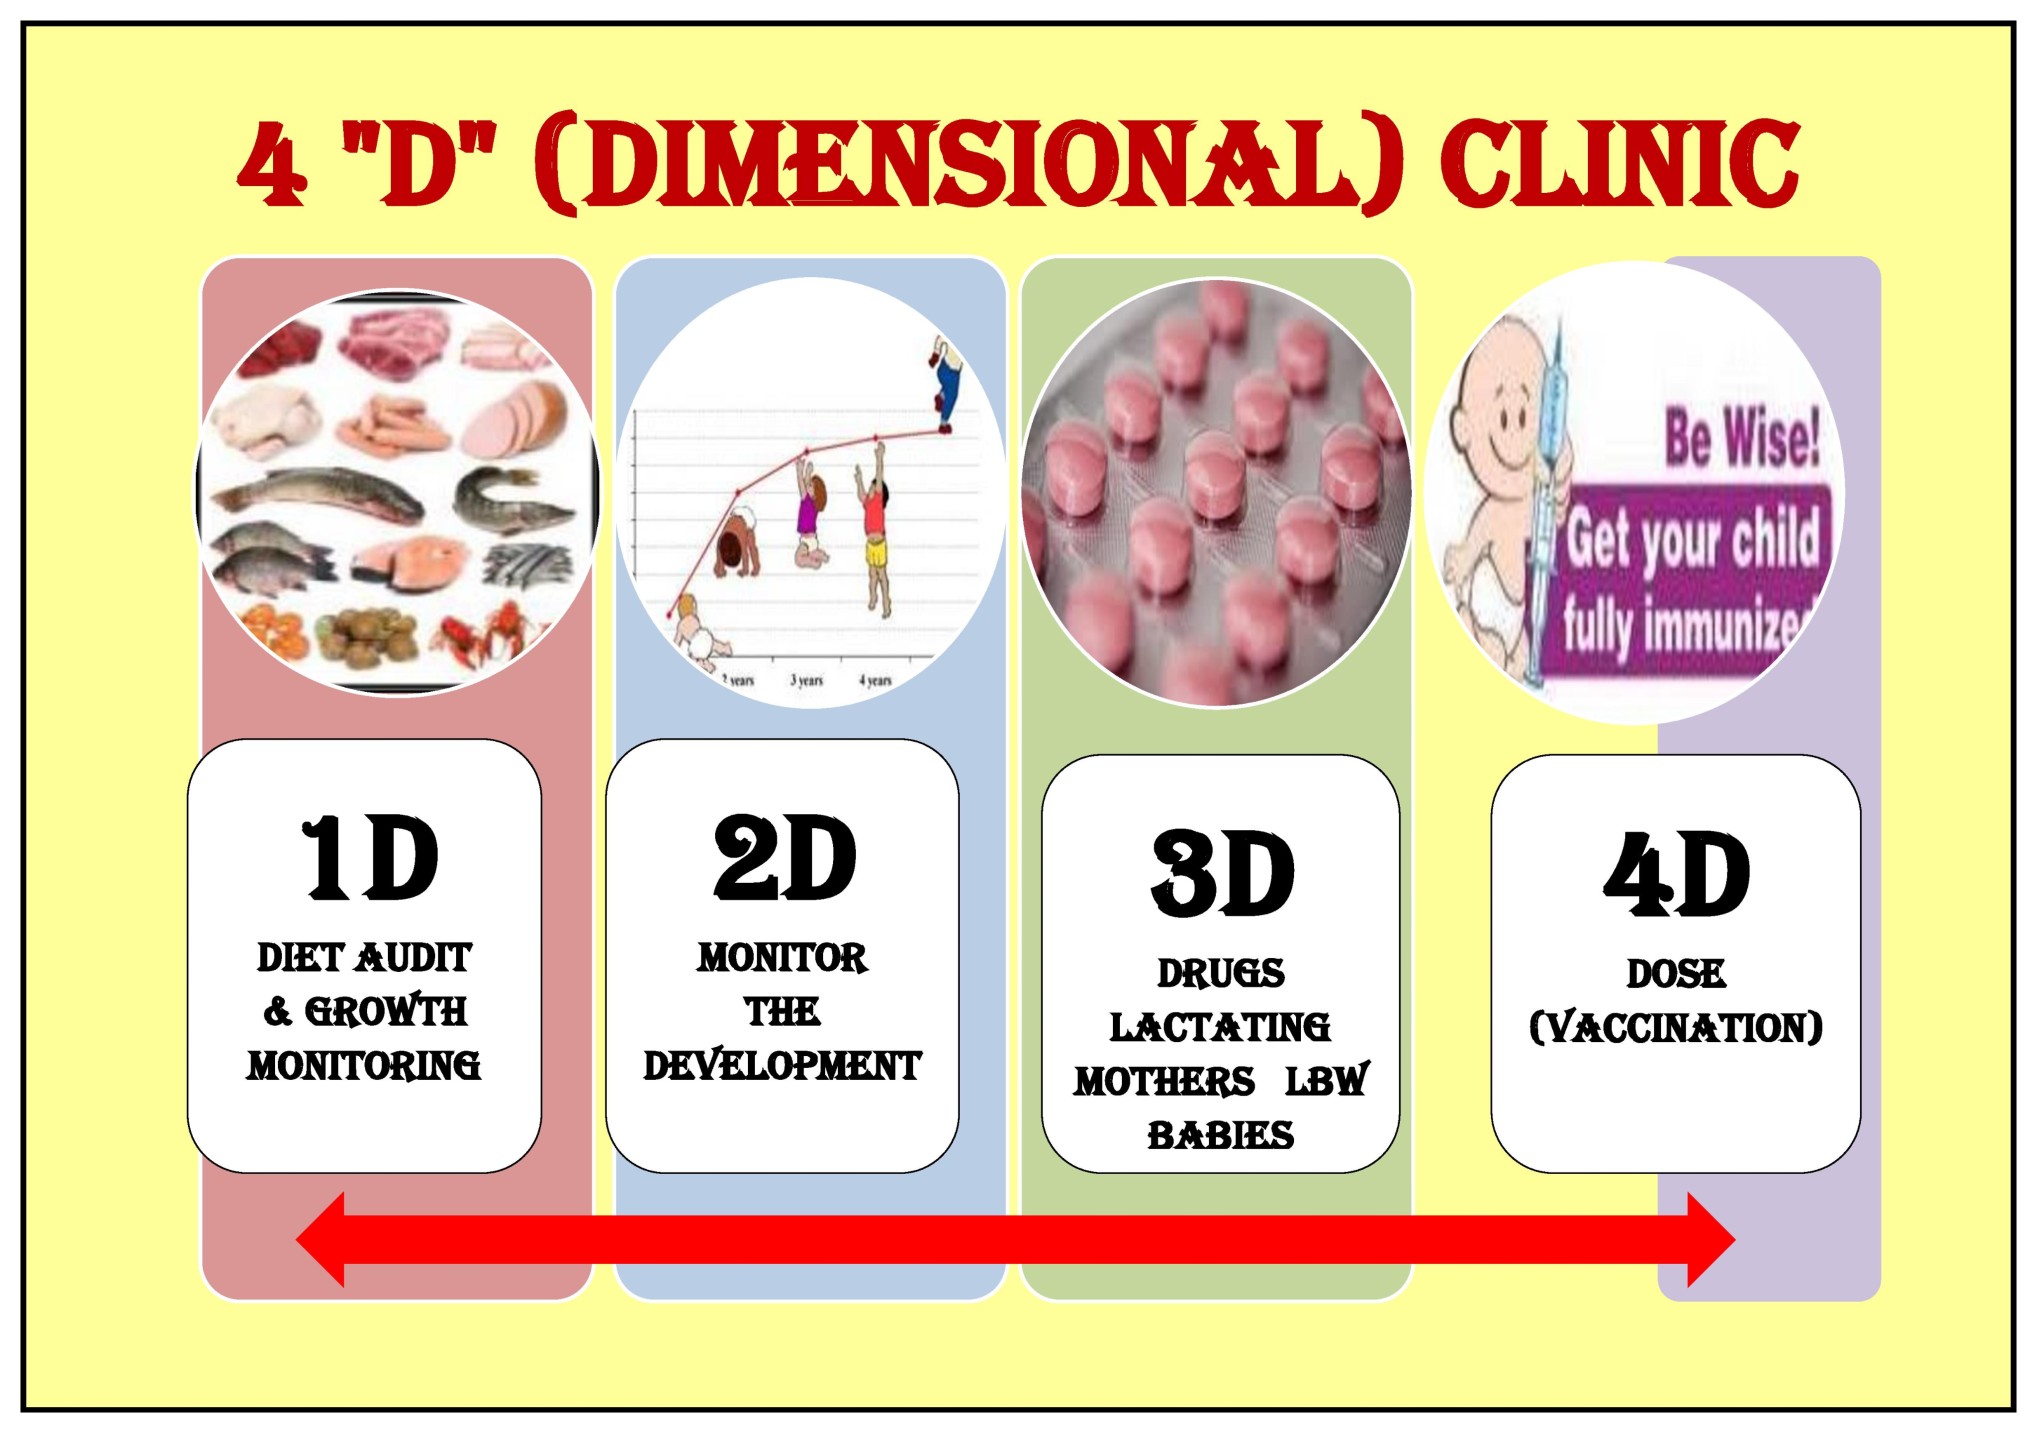 4D clinic poster